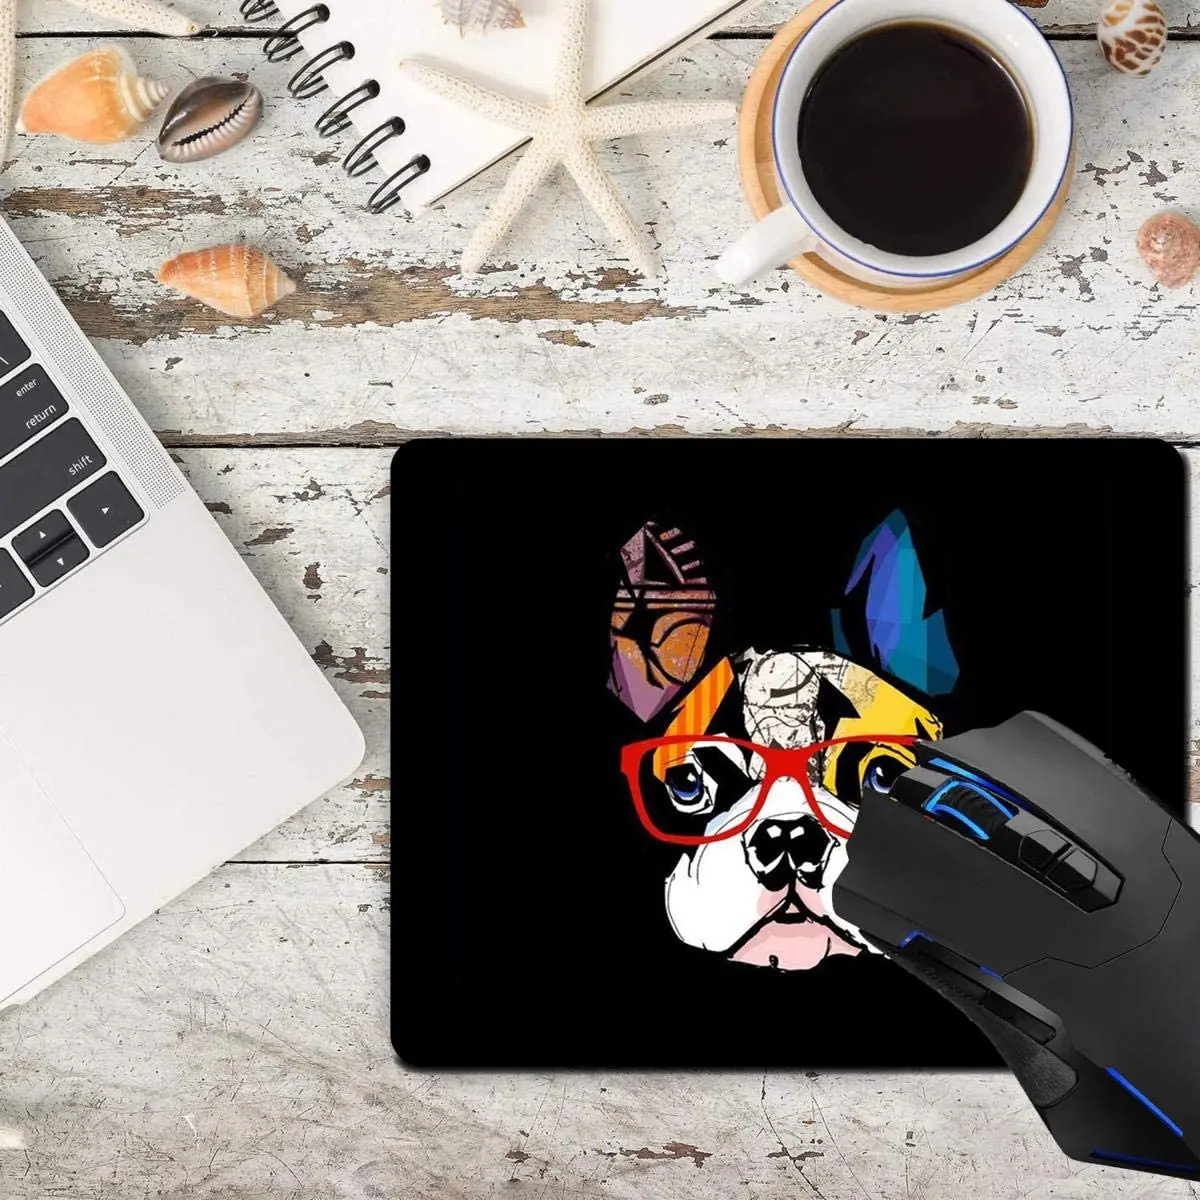 Mouse Pad,French Bulldog Wearing Sunglasses Computer Mouse Pads Desk Accessories Non-Slip Rubber Base,Mousepad for Laptop Mouse